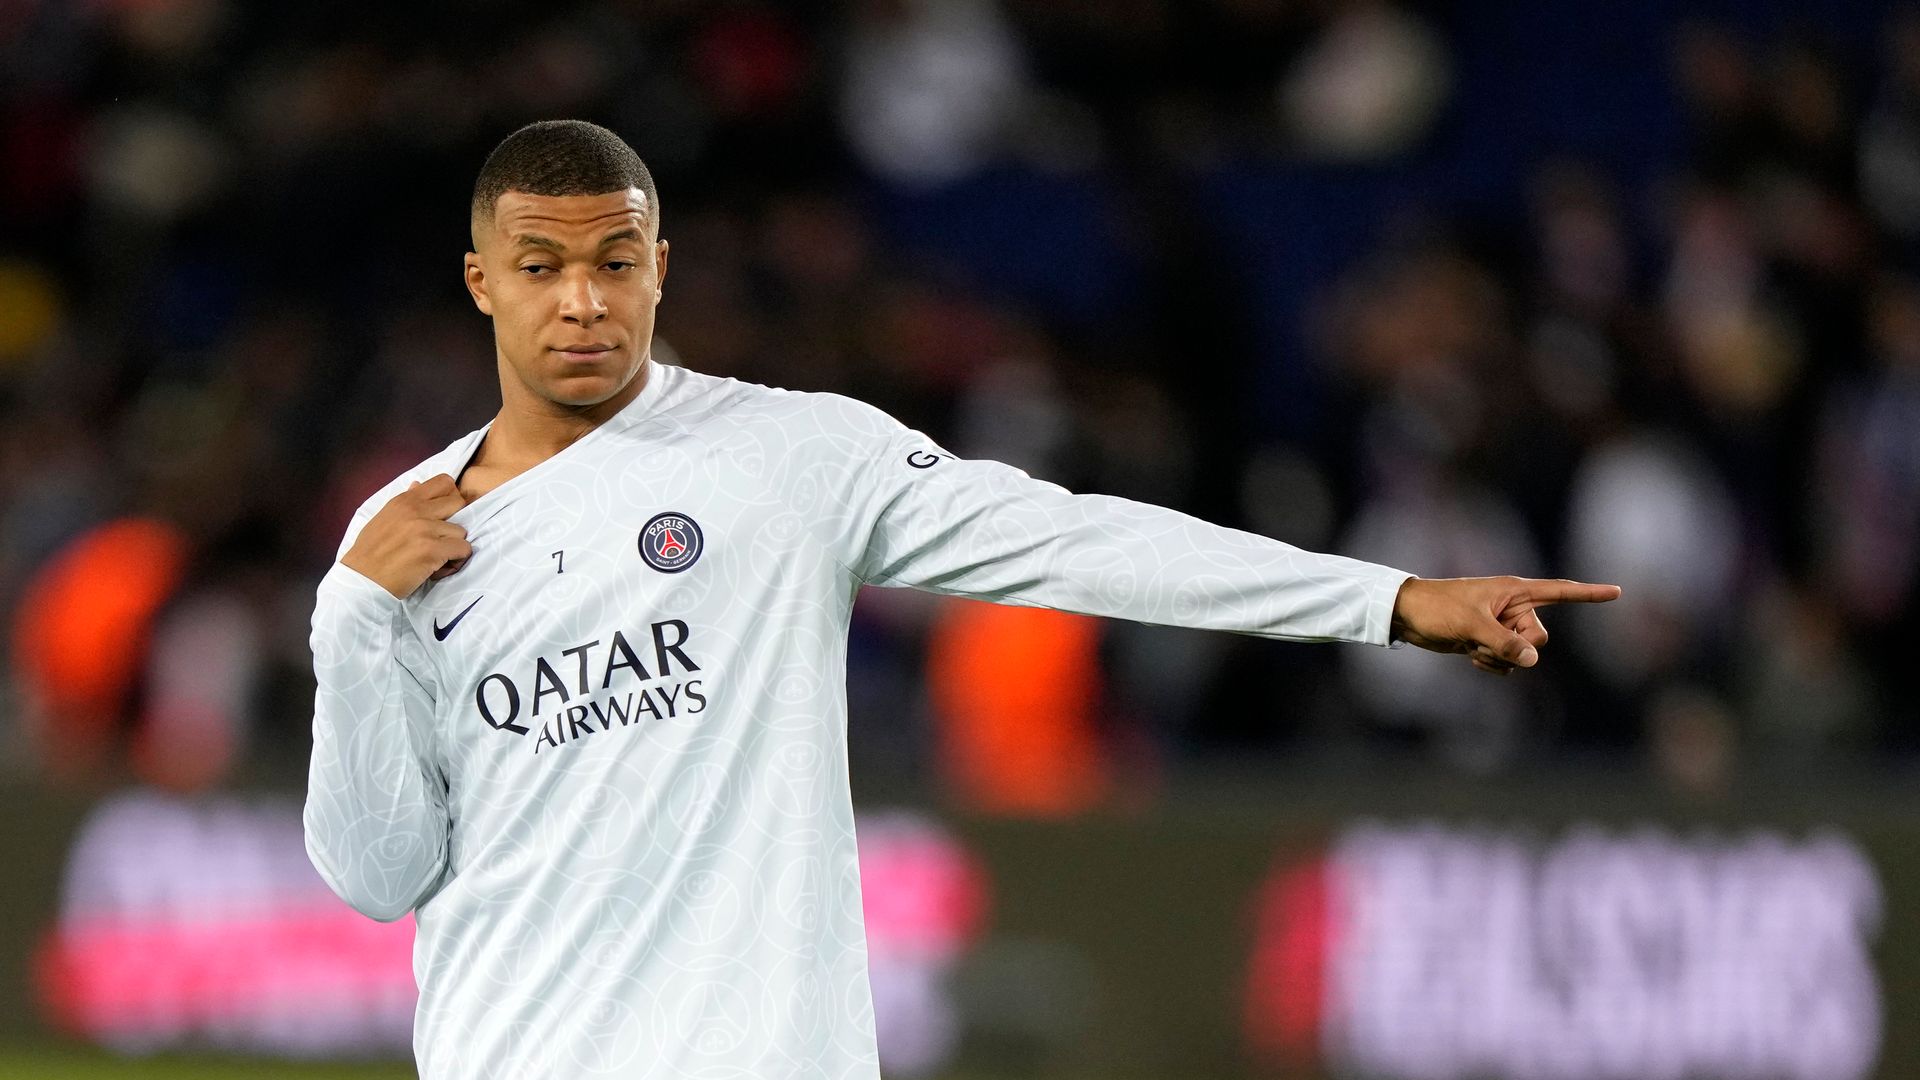 Where could Mbappe go next if he leaves PSG?